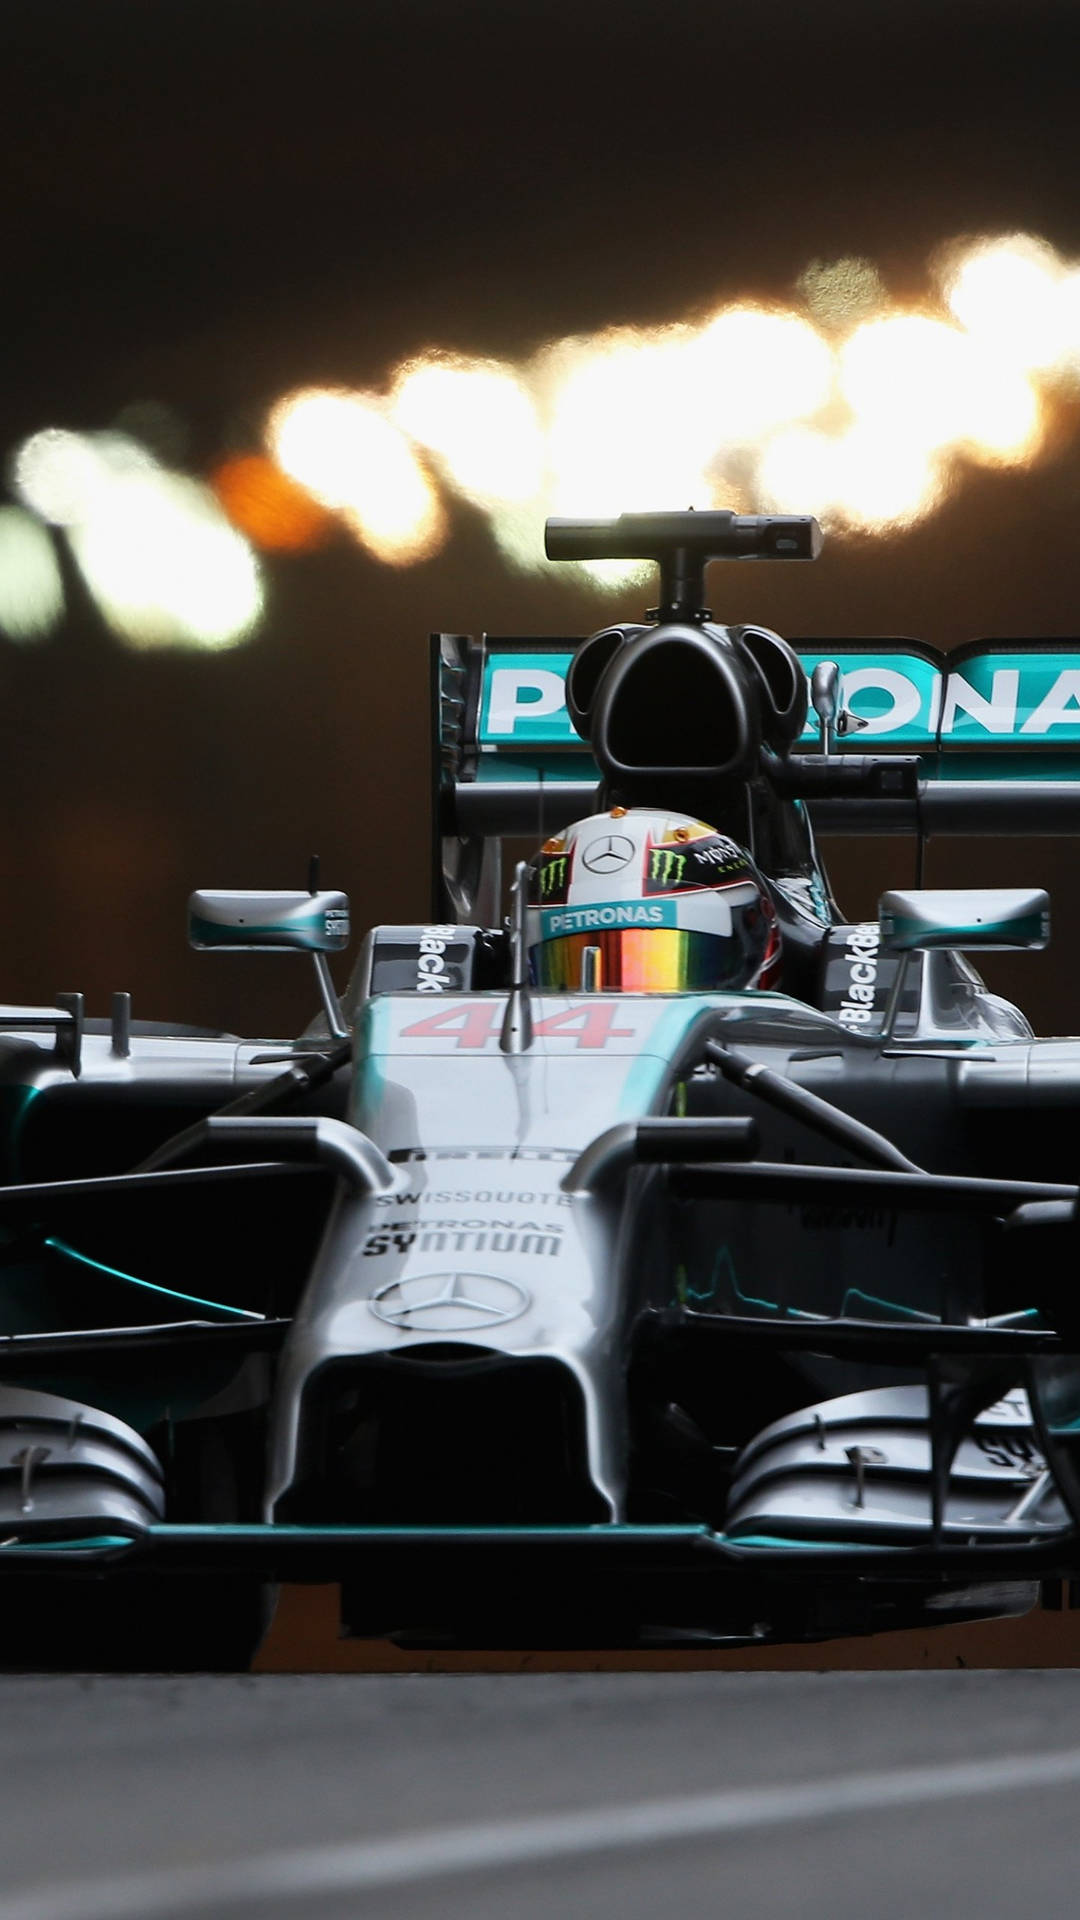 "F1 Racing at Your Fingertips with the Mercedes F1 iPhone" Wallpaper